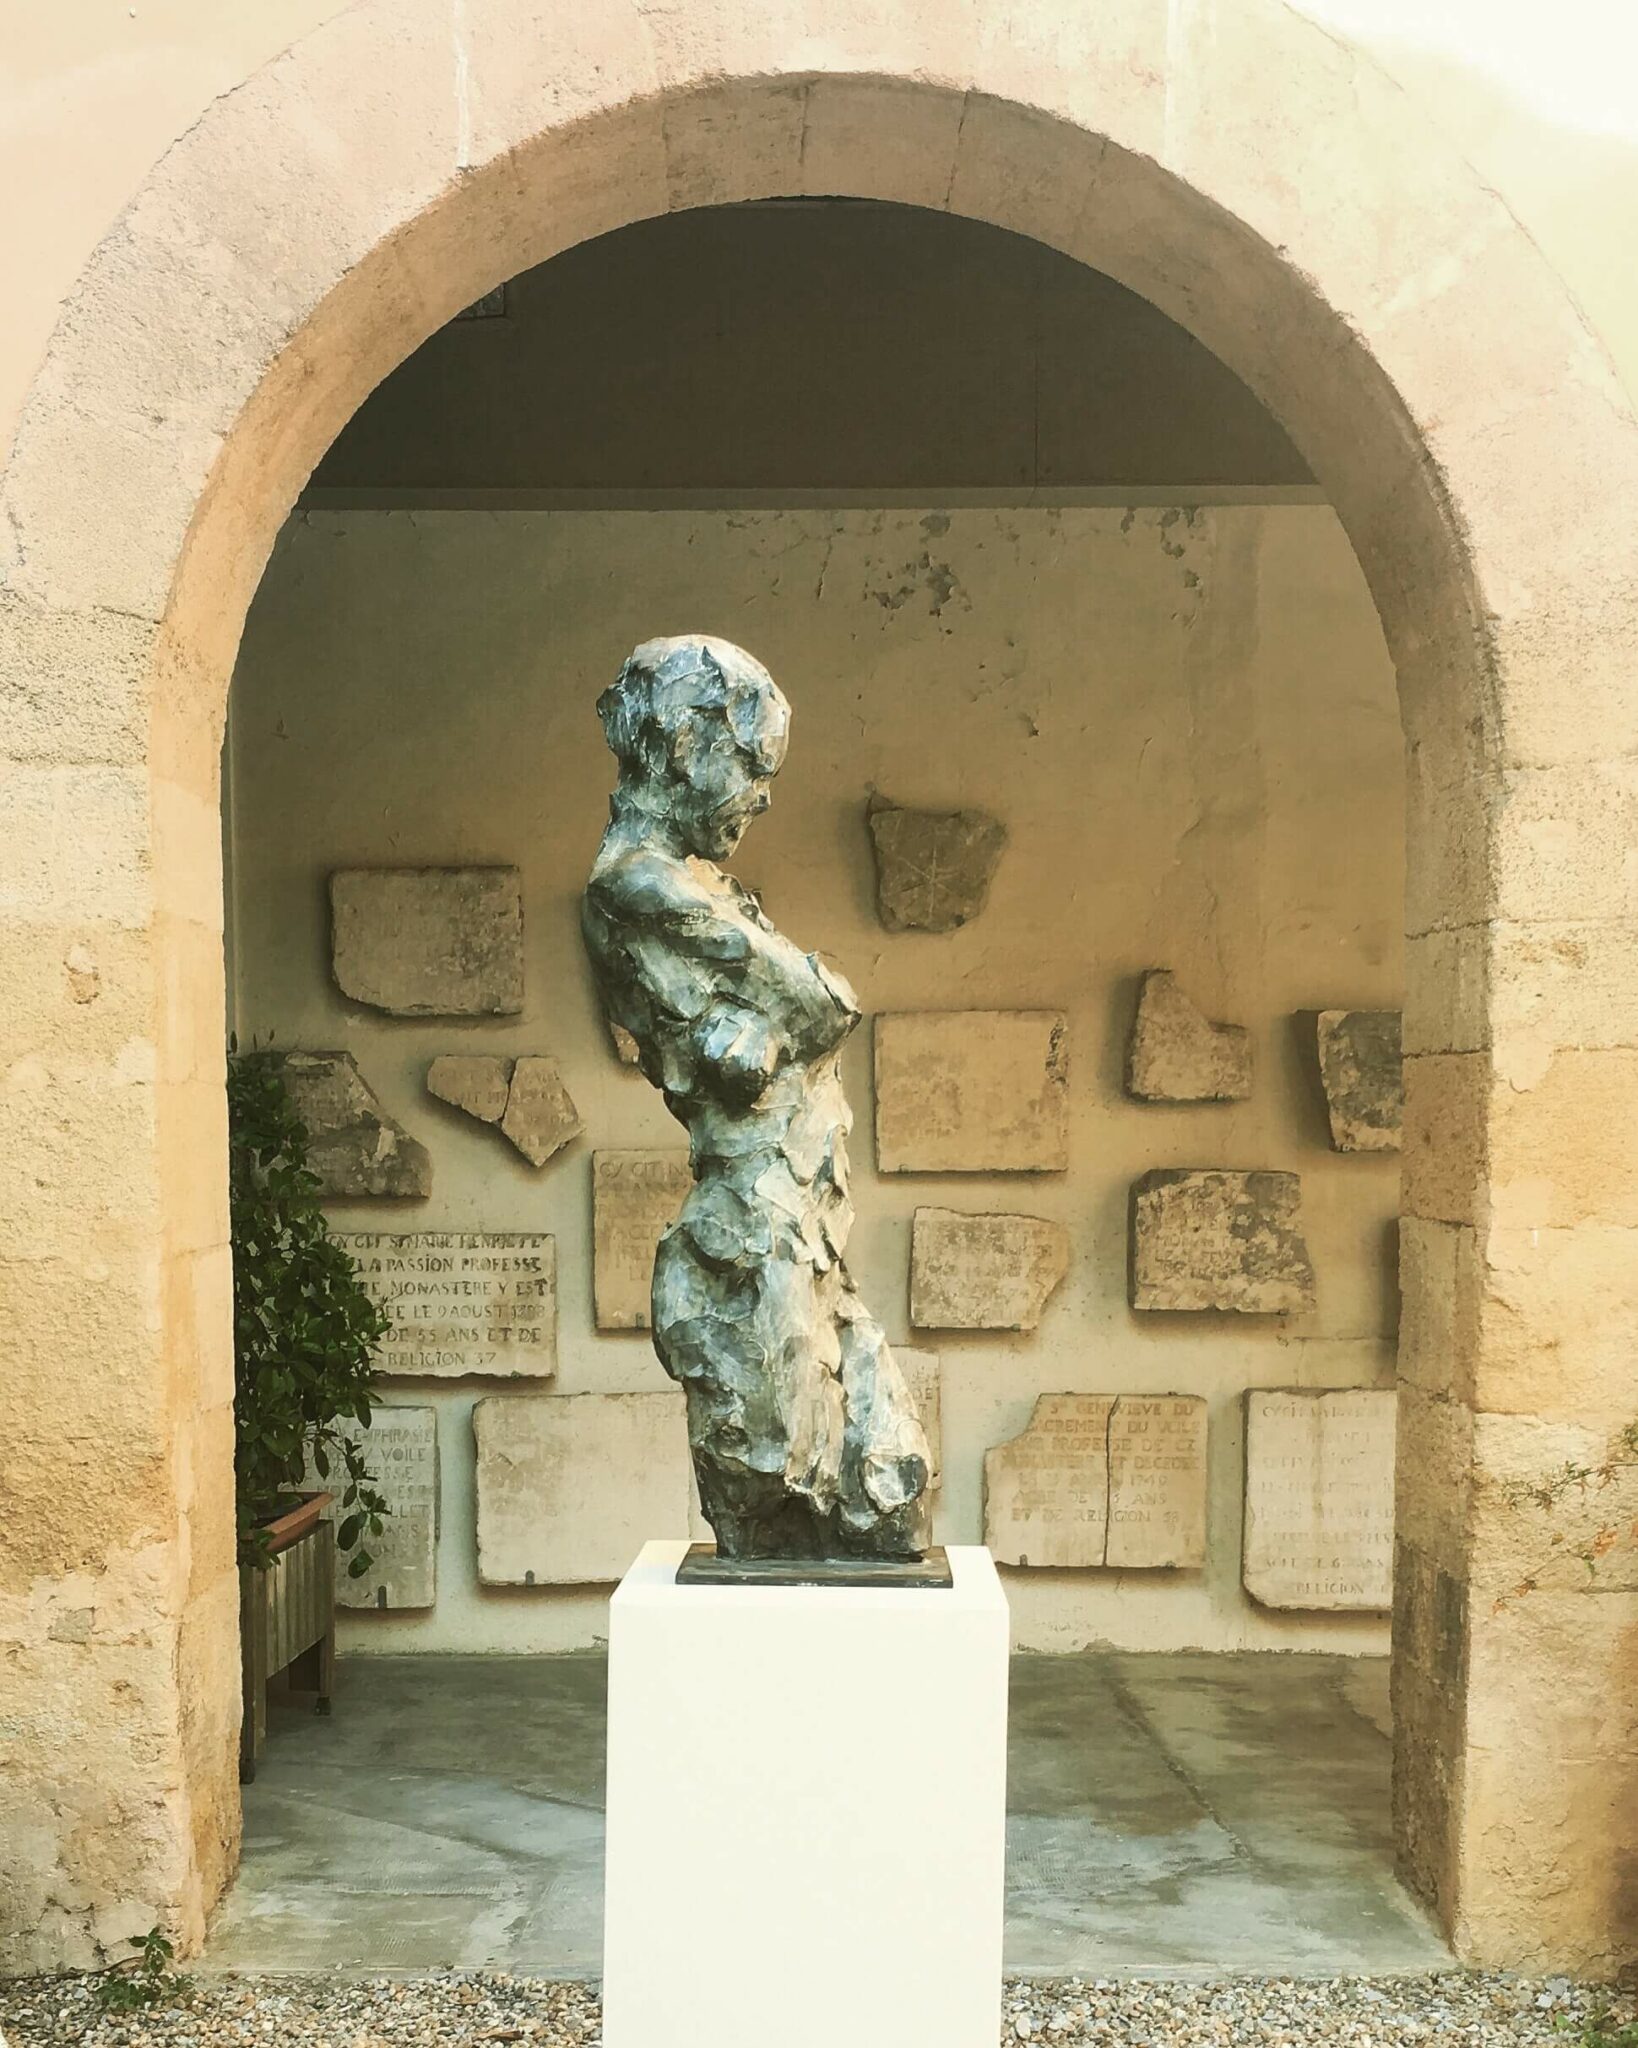 032_Catherine thiry expo Aix-en-provence 2018 andrea fereol flaneries bronze sculpture